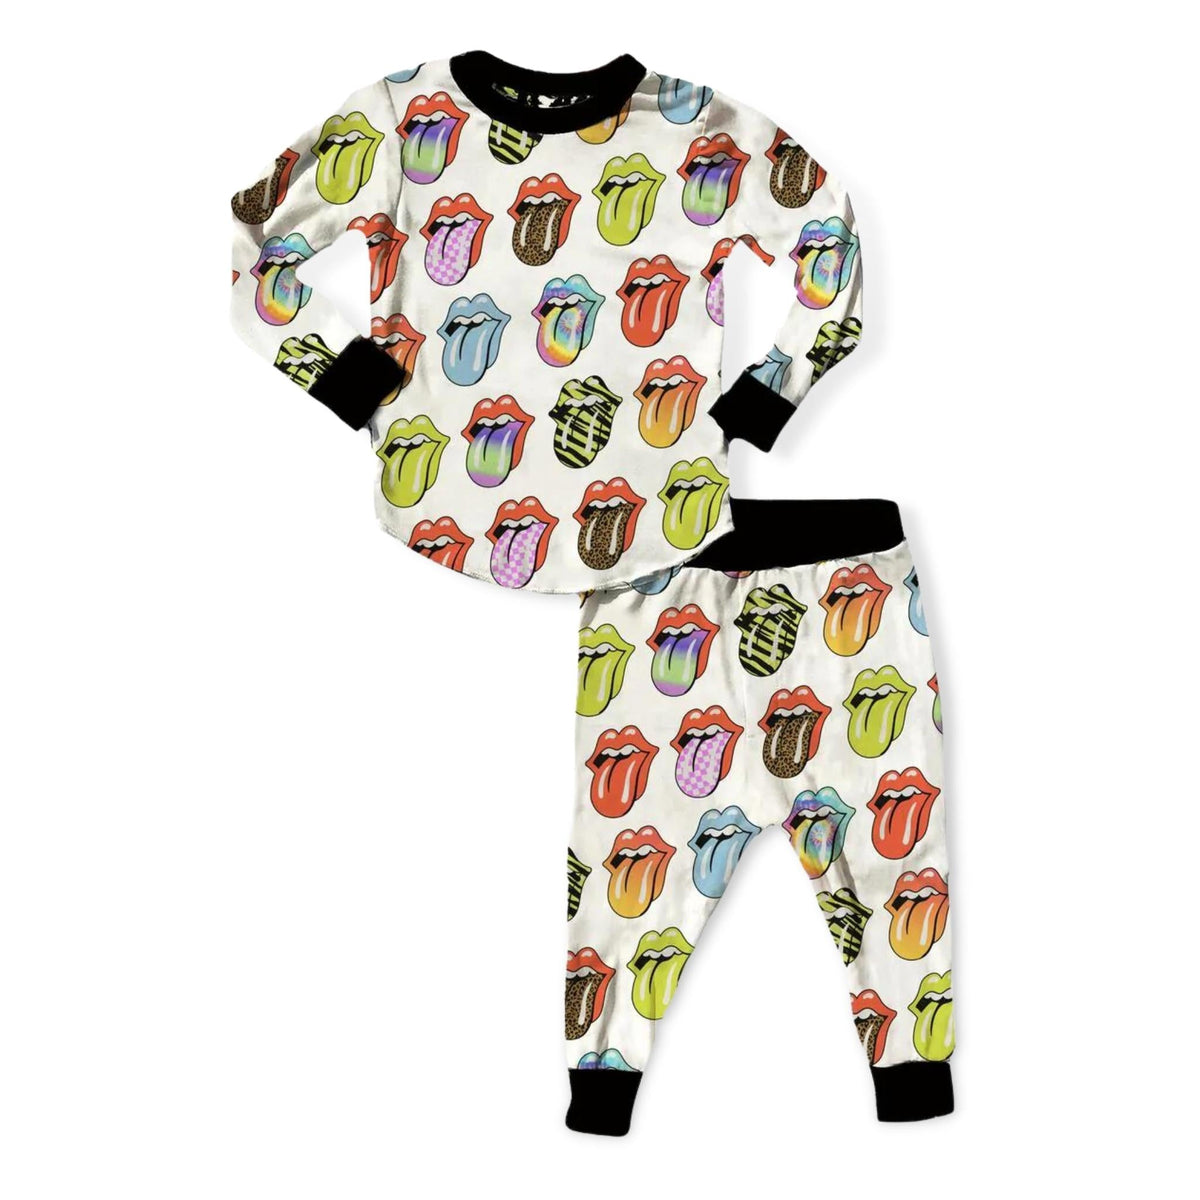 Rowdy Sprout Printed Pattern The Rolling Stones Bamboo Set - a Spirit Animal - Loungewear $60-$75 $60-$90 10Y